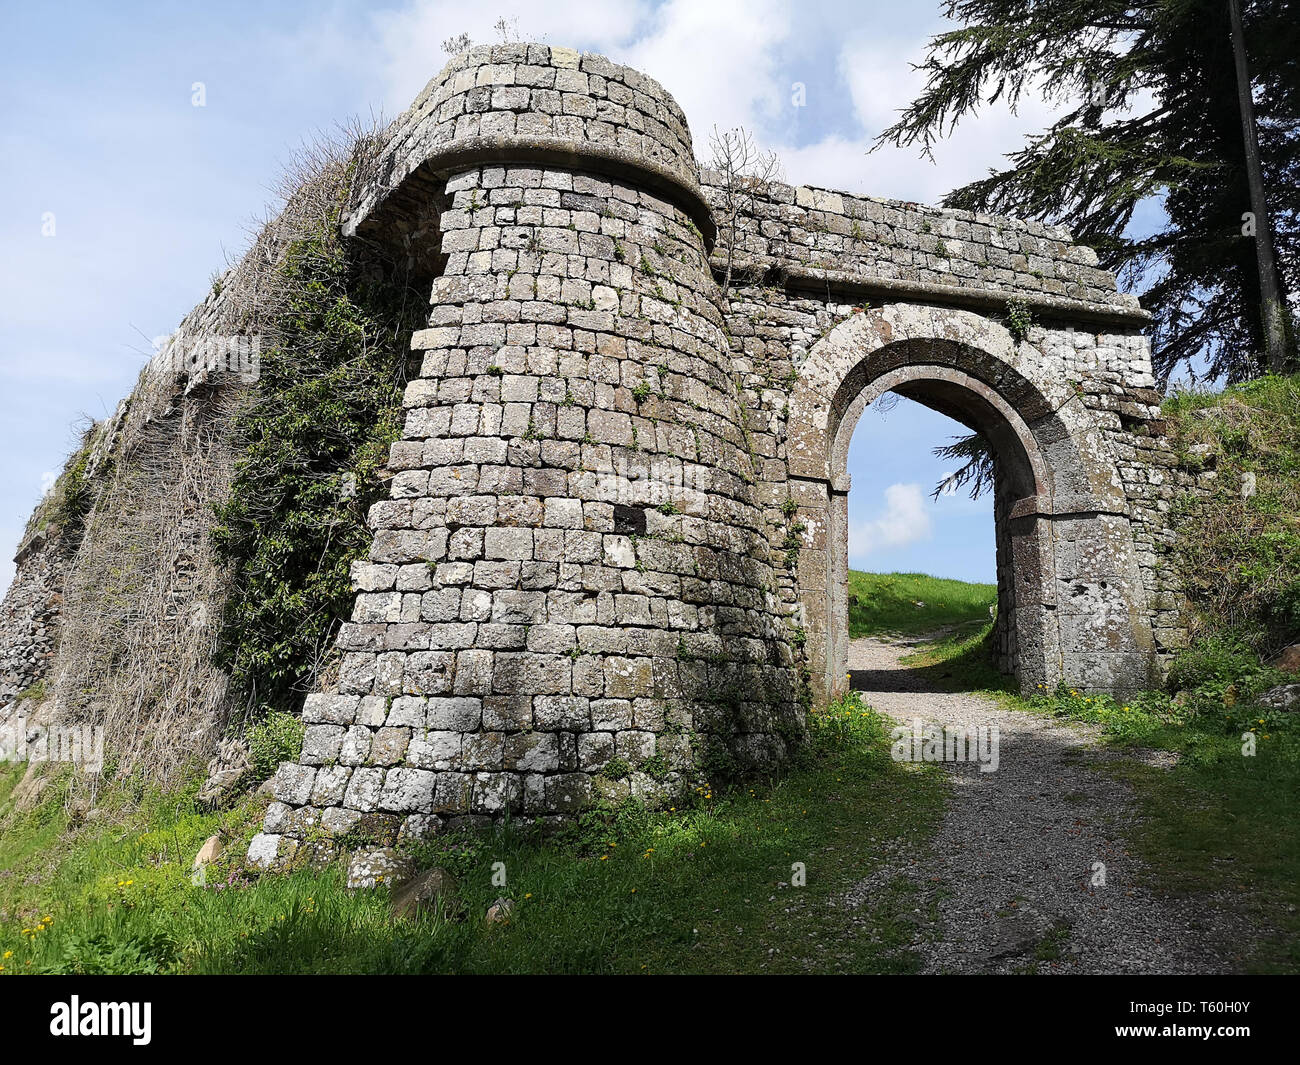 Detail of the stone entrance along the wall surrounding a medieval village. Stock Photo